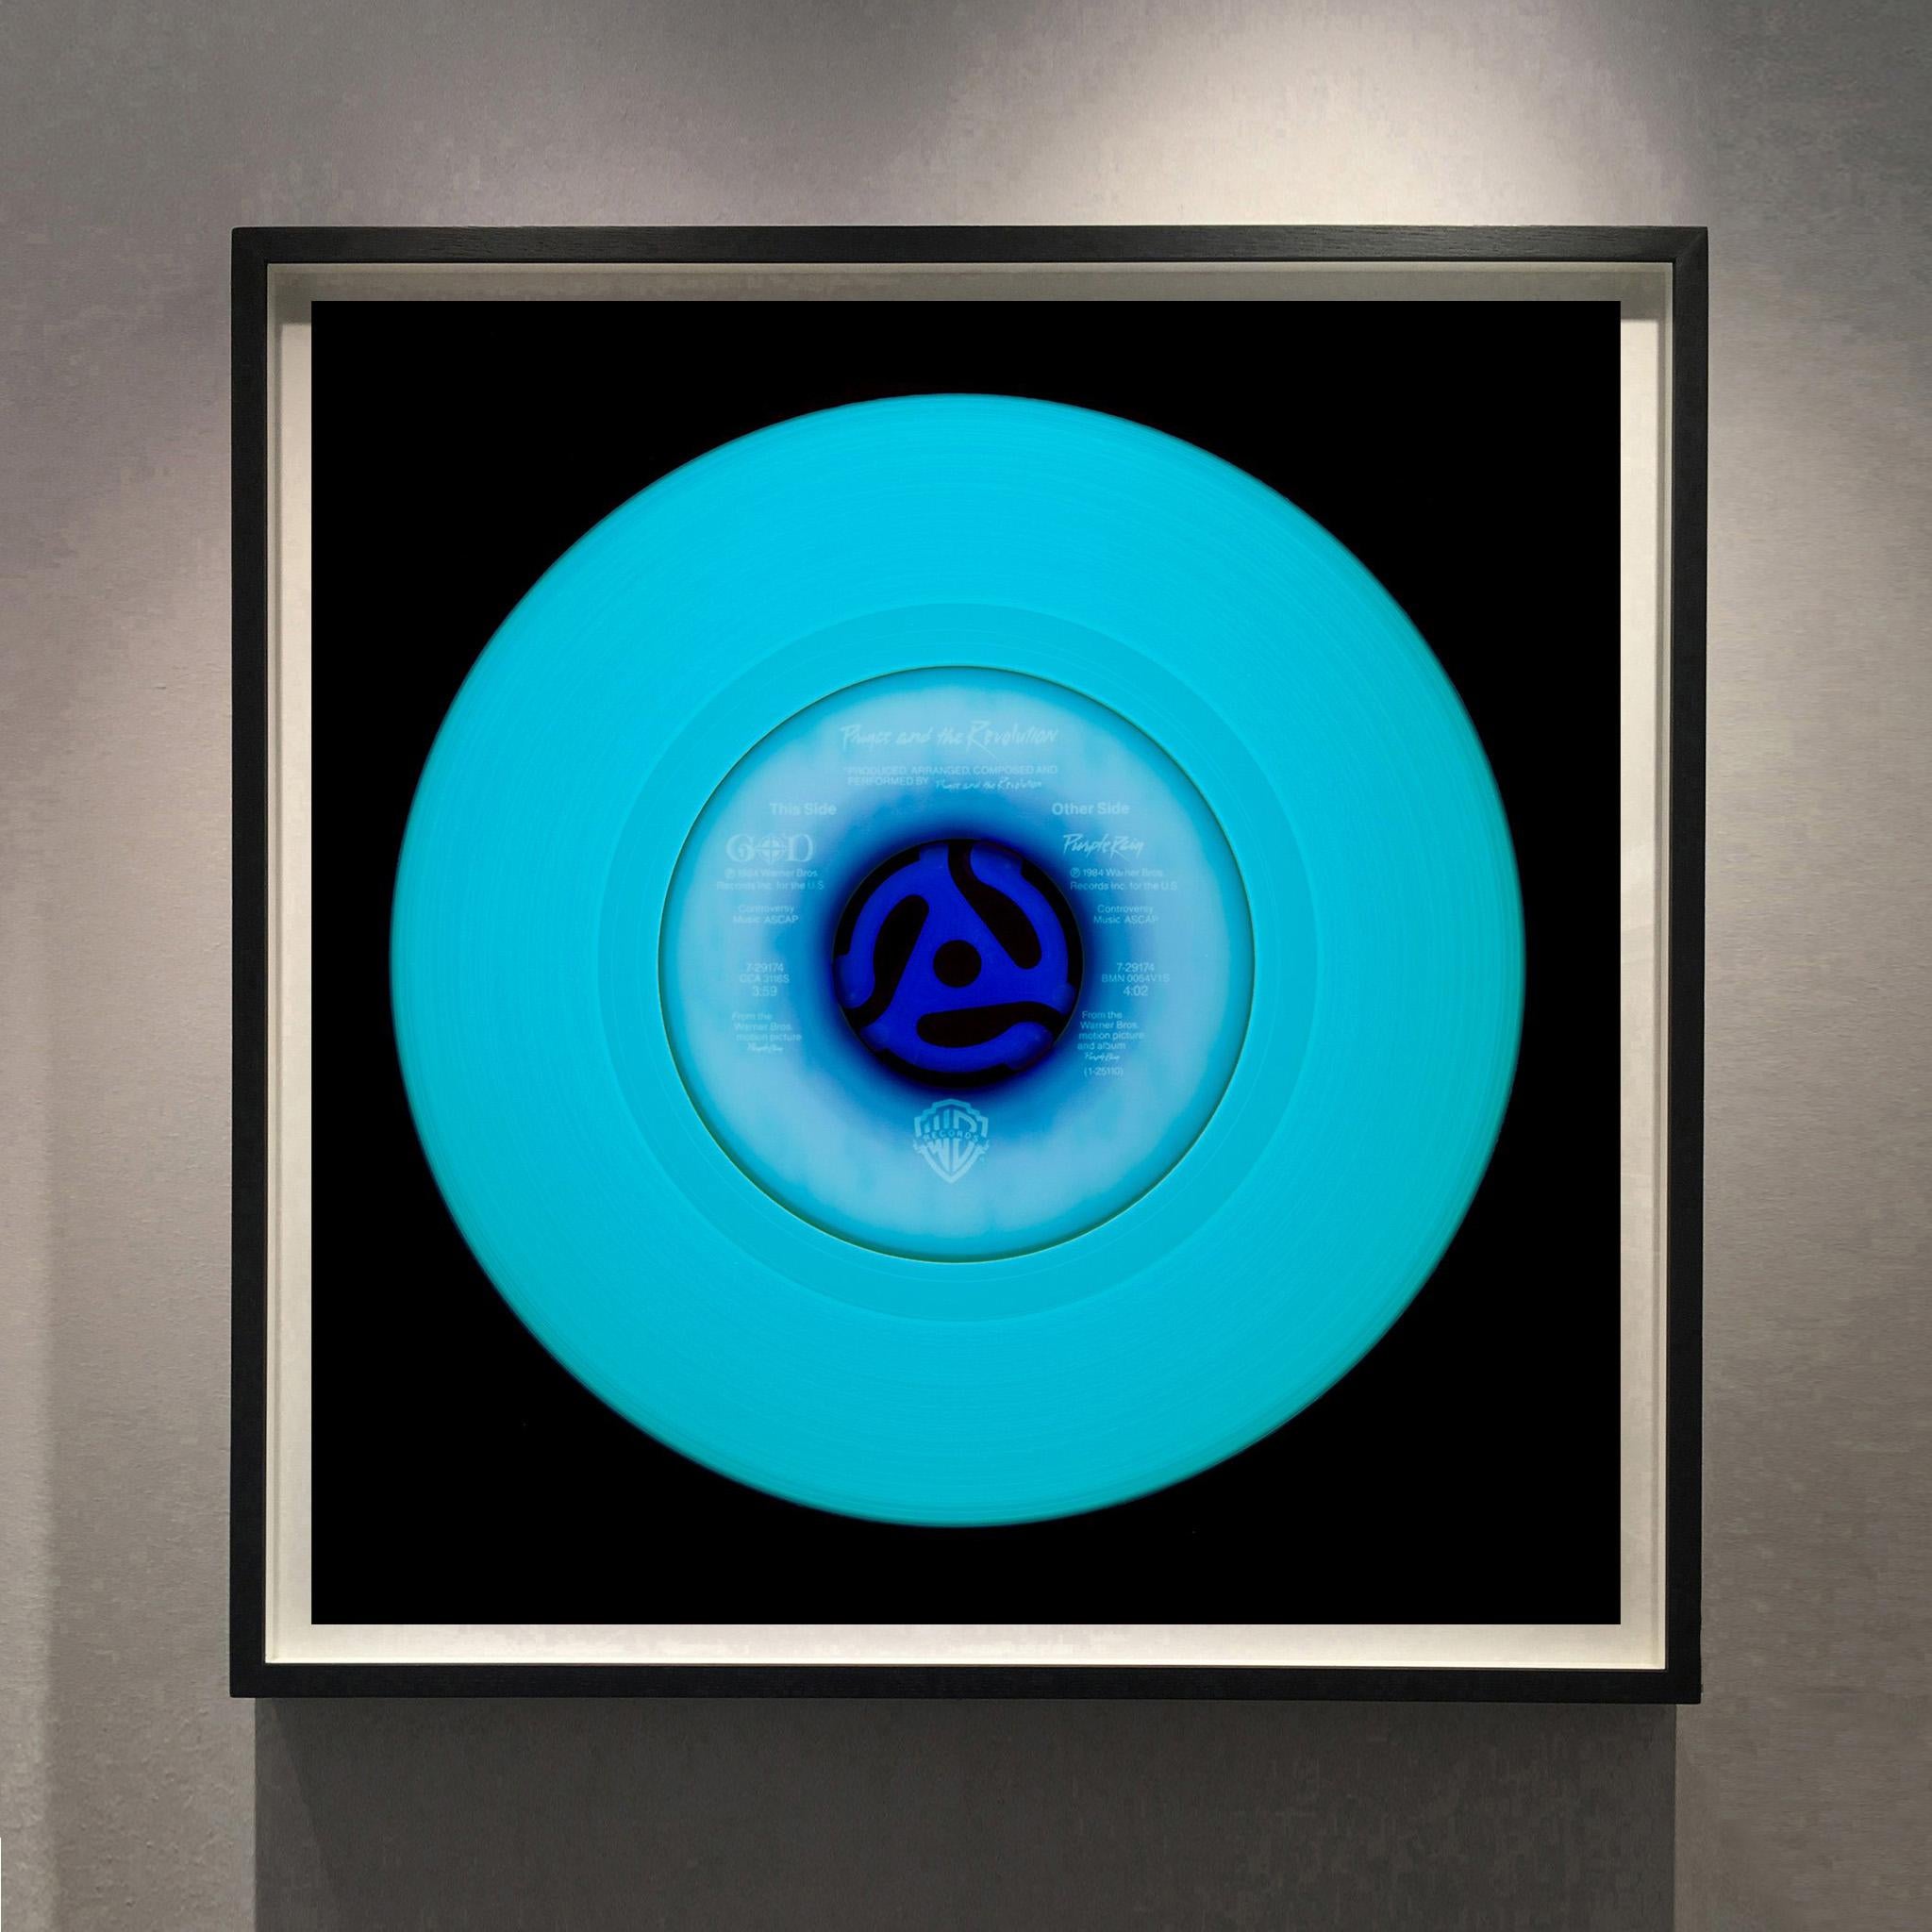 Vinyl Collection, Other Side (Blue) - Conceptual Pop Art Color Photography - Print by Heidler & Heeps